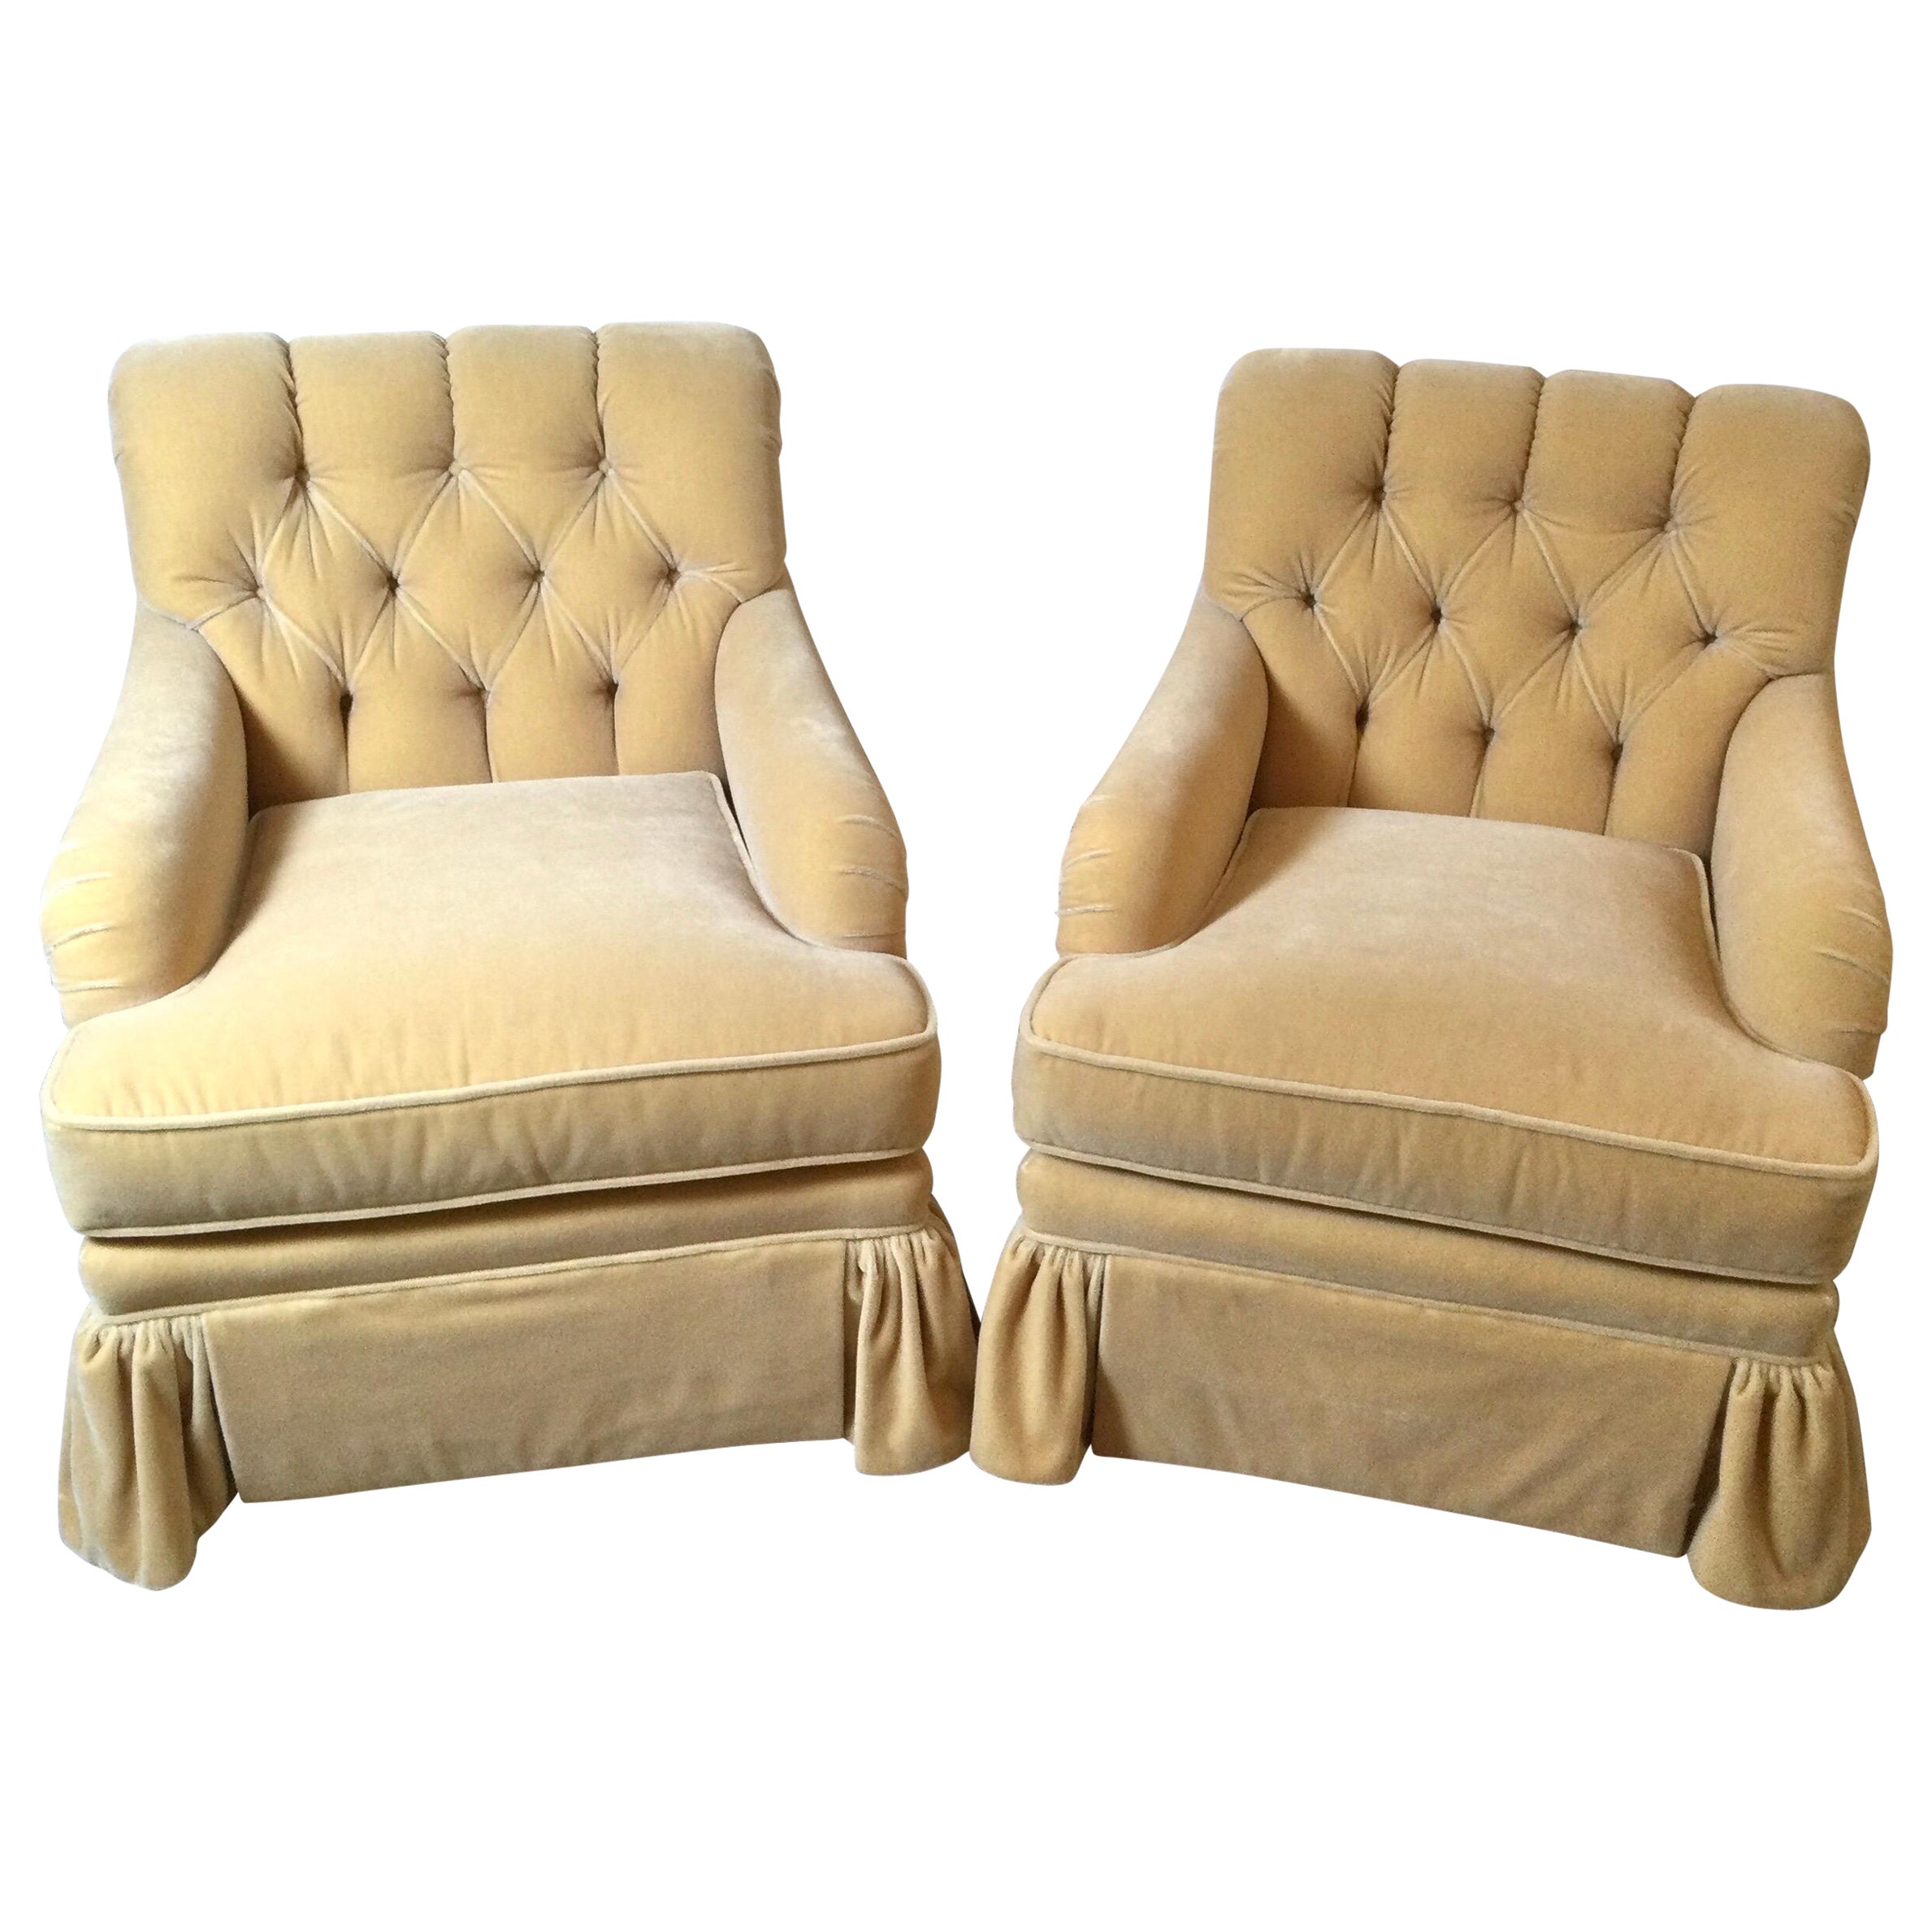 Late 20th Century Pair of Fawn Colored Mohair Club Chairs with Tufted Backs